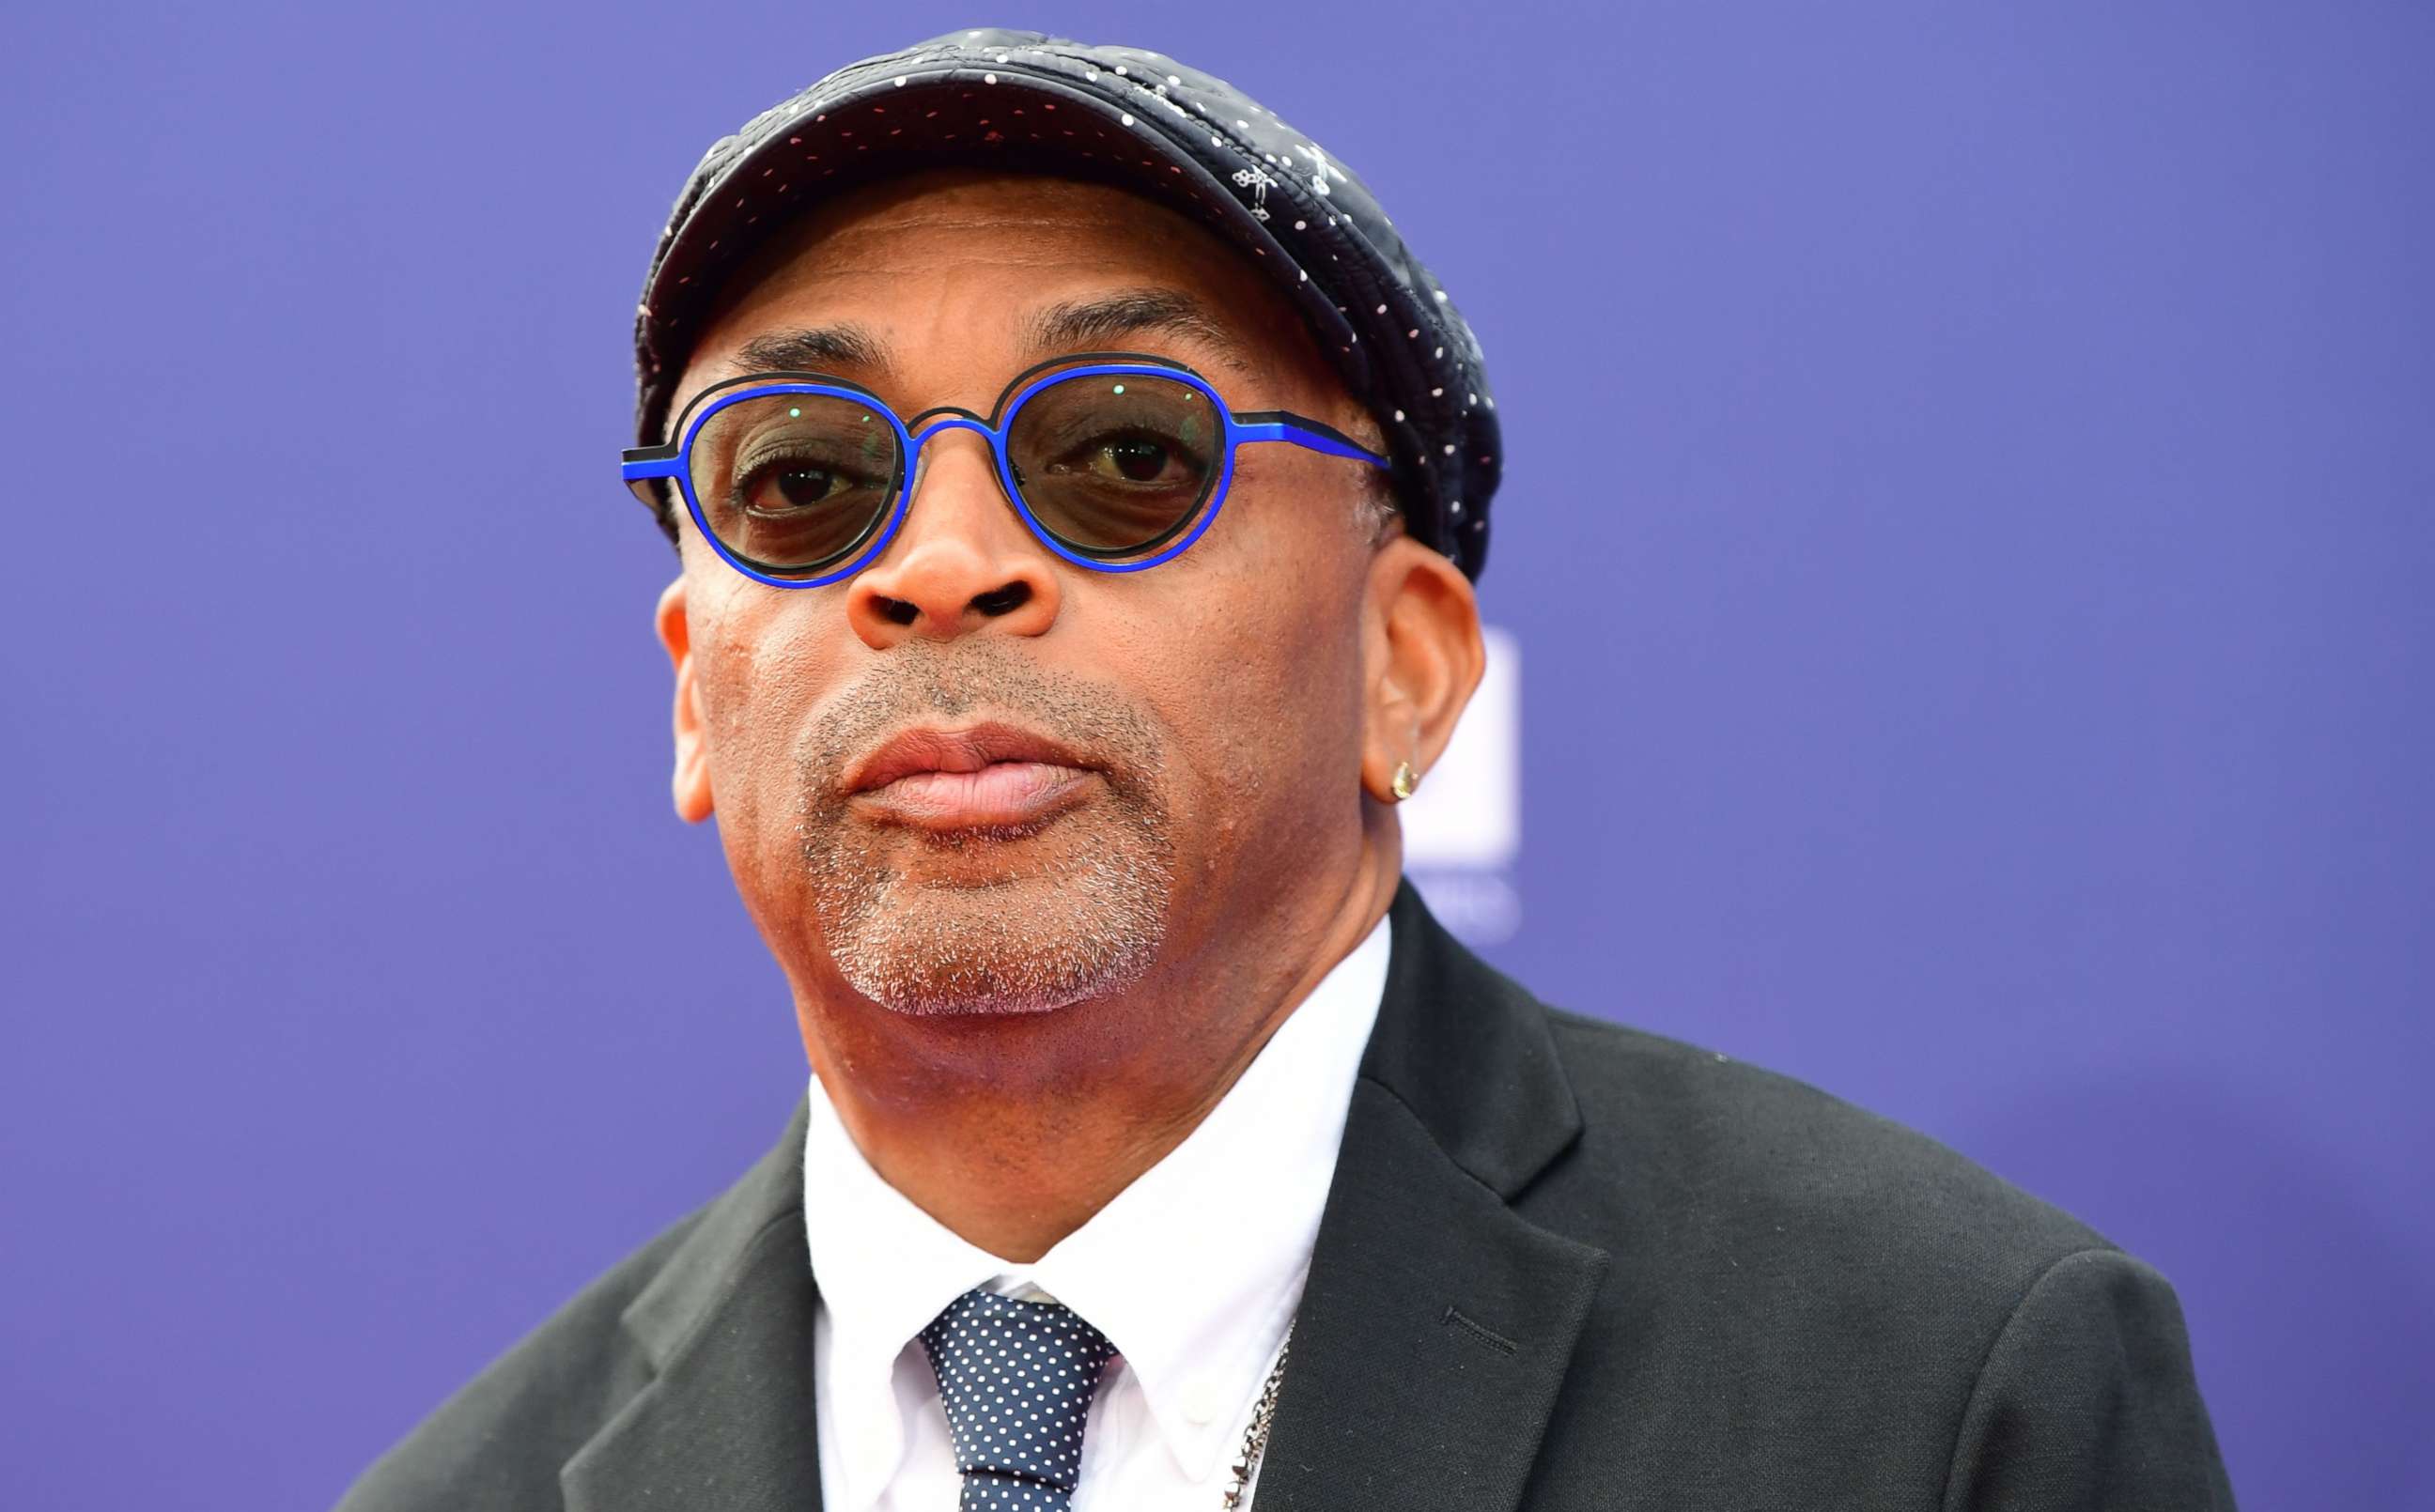 PHOTO: US director Spike Lee arrives for the 47th American Film Institute (AFI) Life Achievement Award Gala at the Dolby theatre in Hollywood on June 6, 2019.